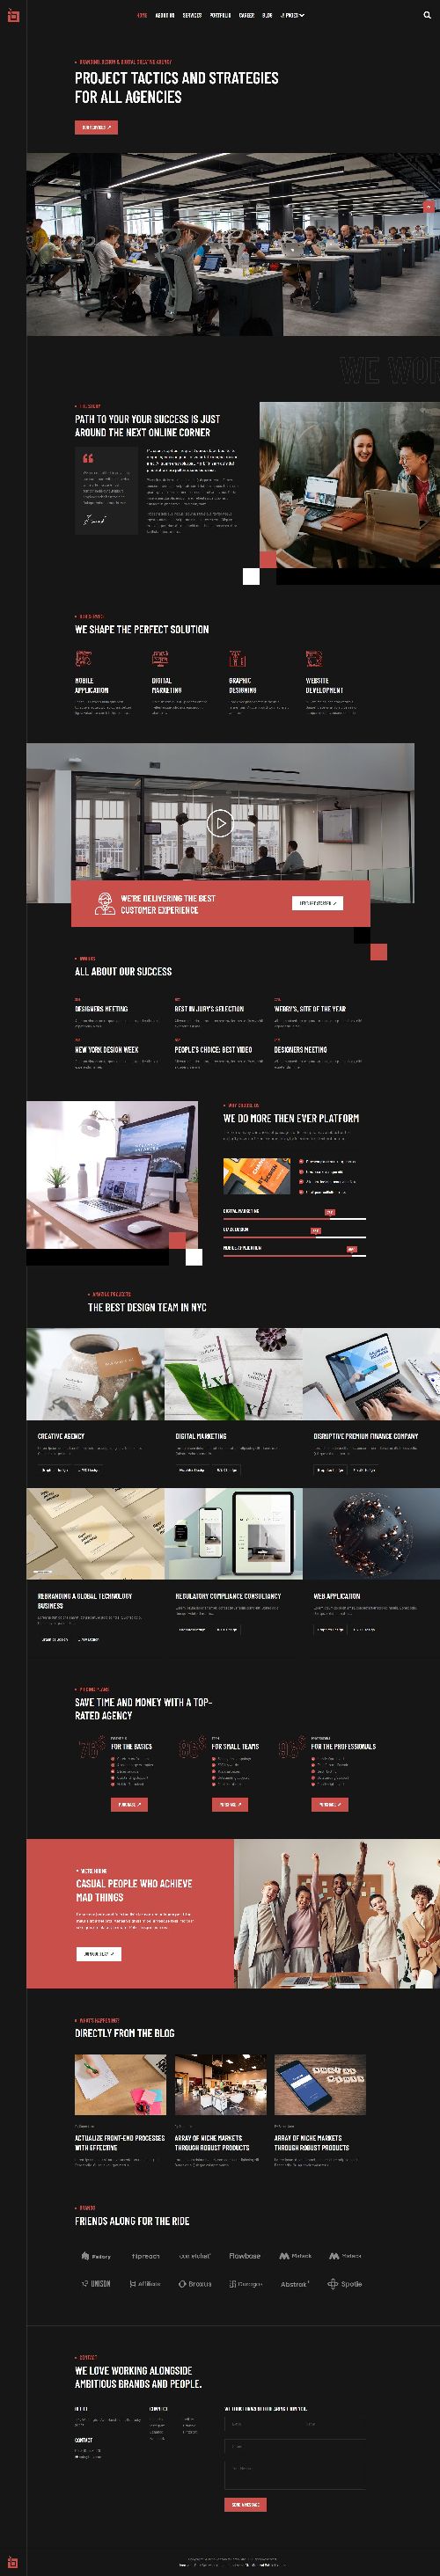 Compact - Joomla 4 Template for Business and Corporate Sites